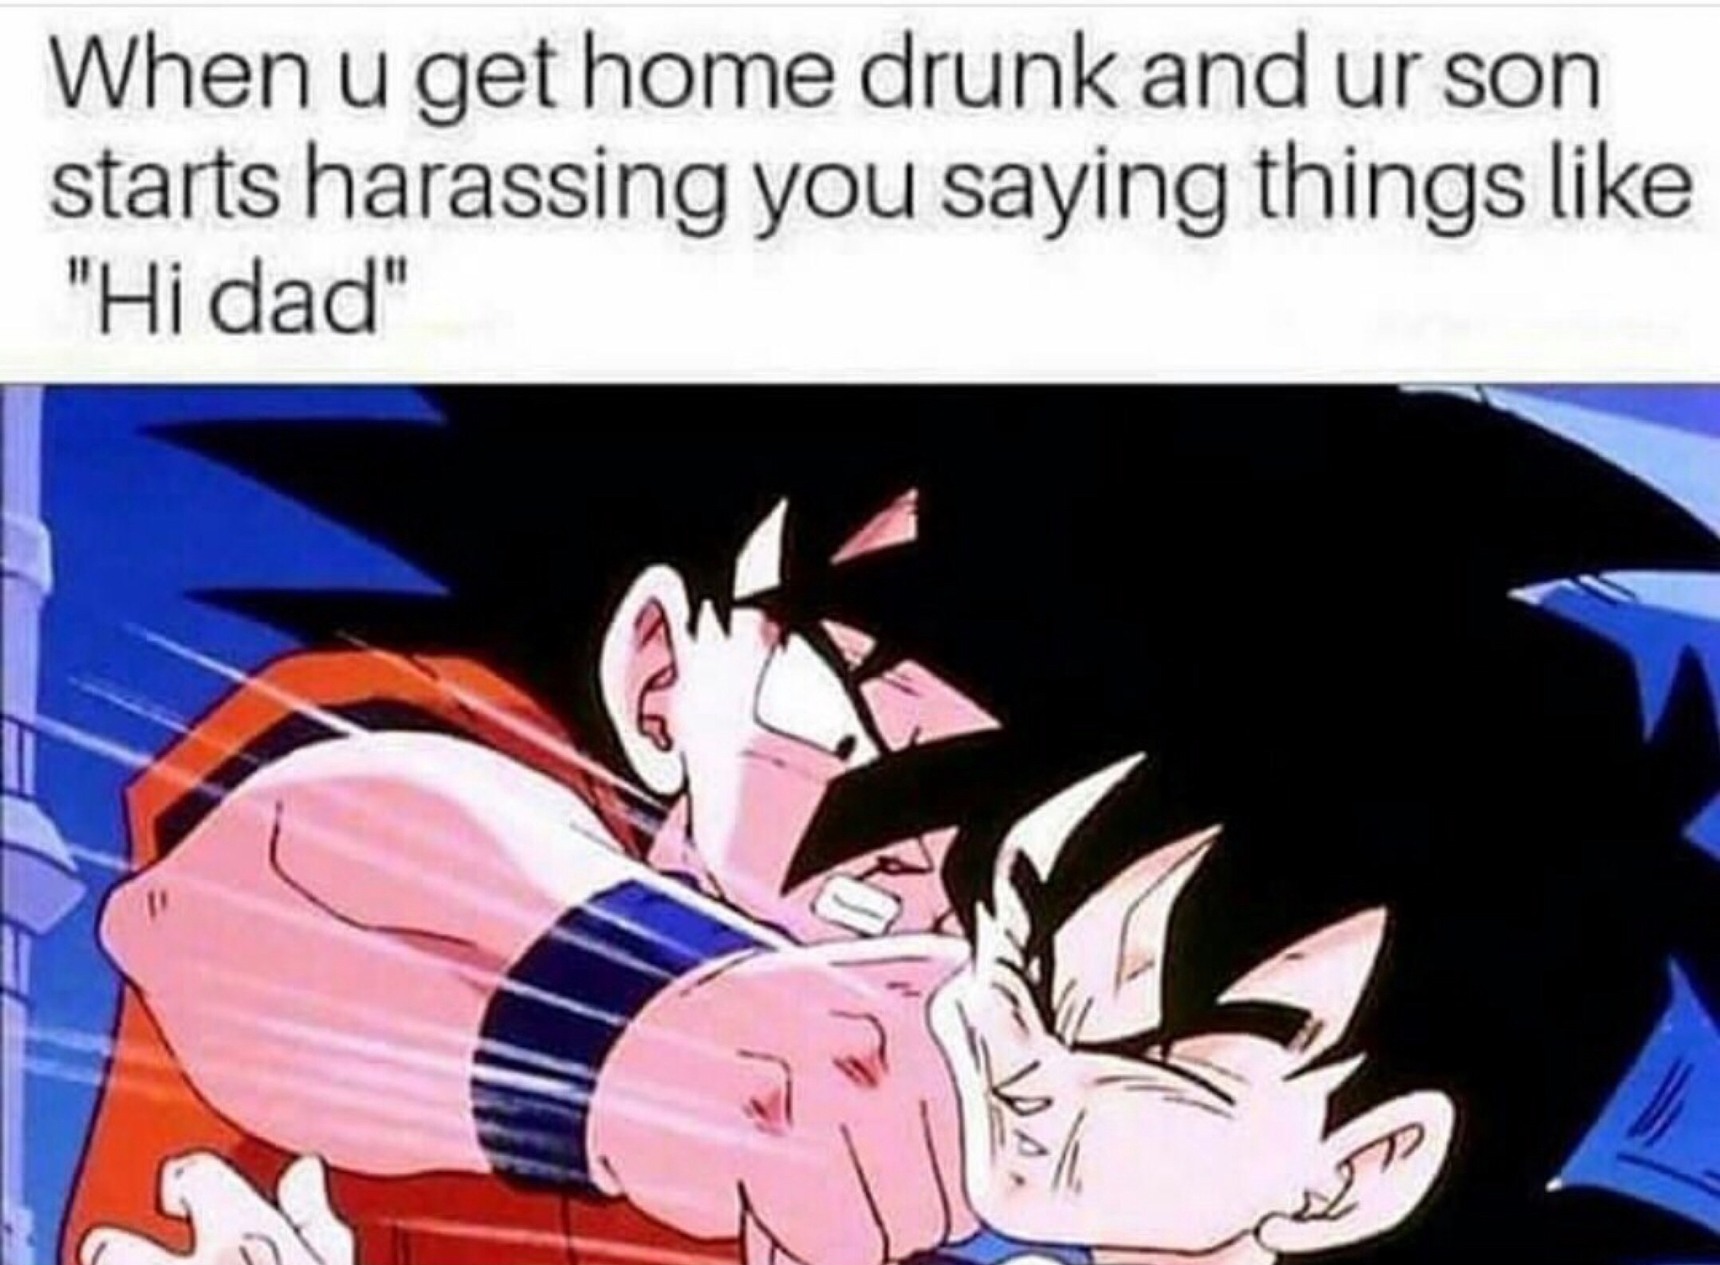 Now I know why my dad hit me, it was self defence - meme